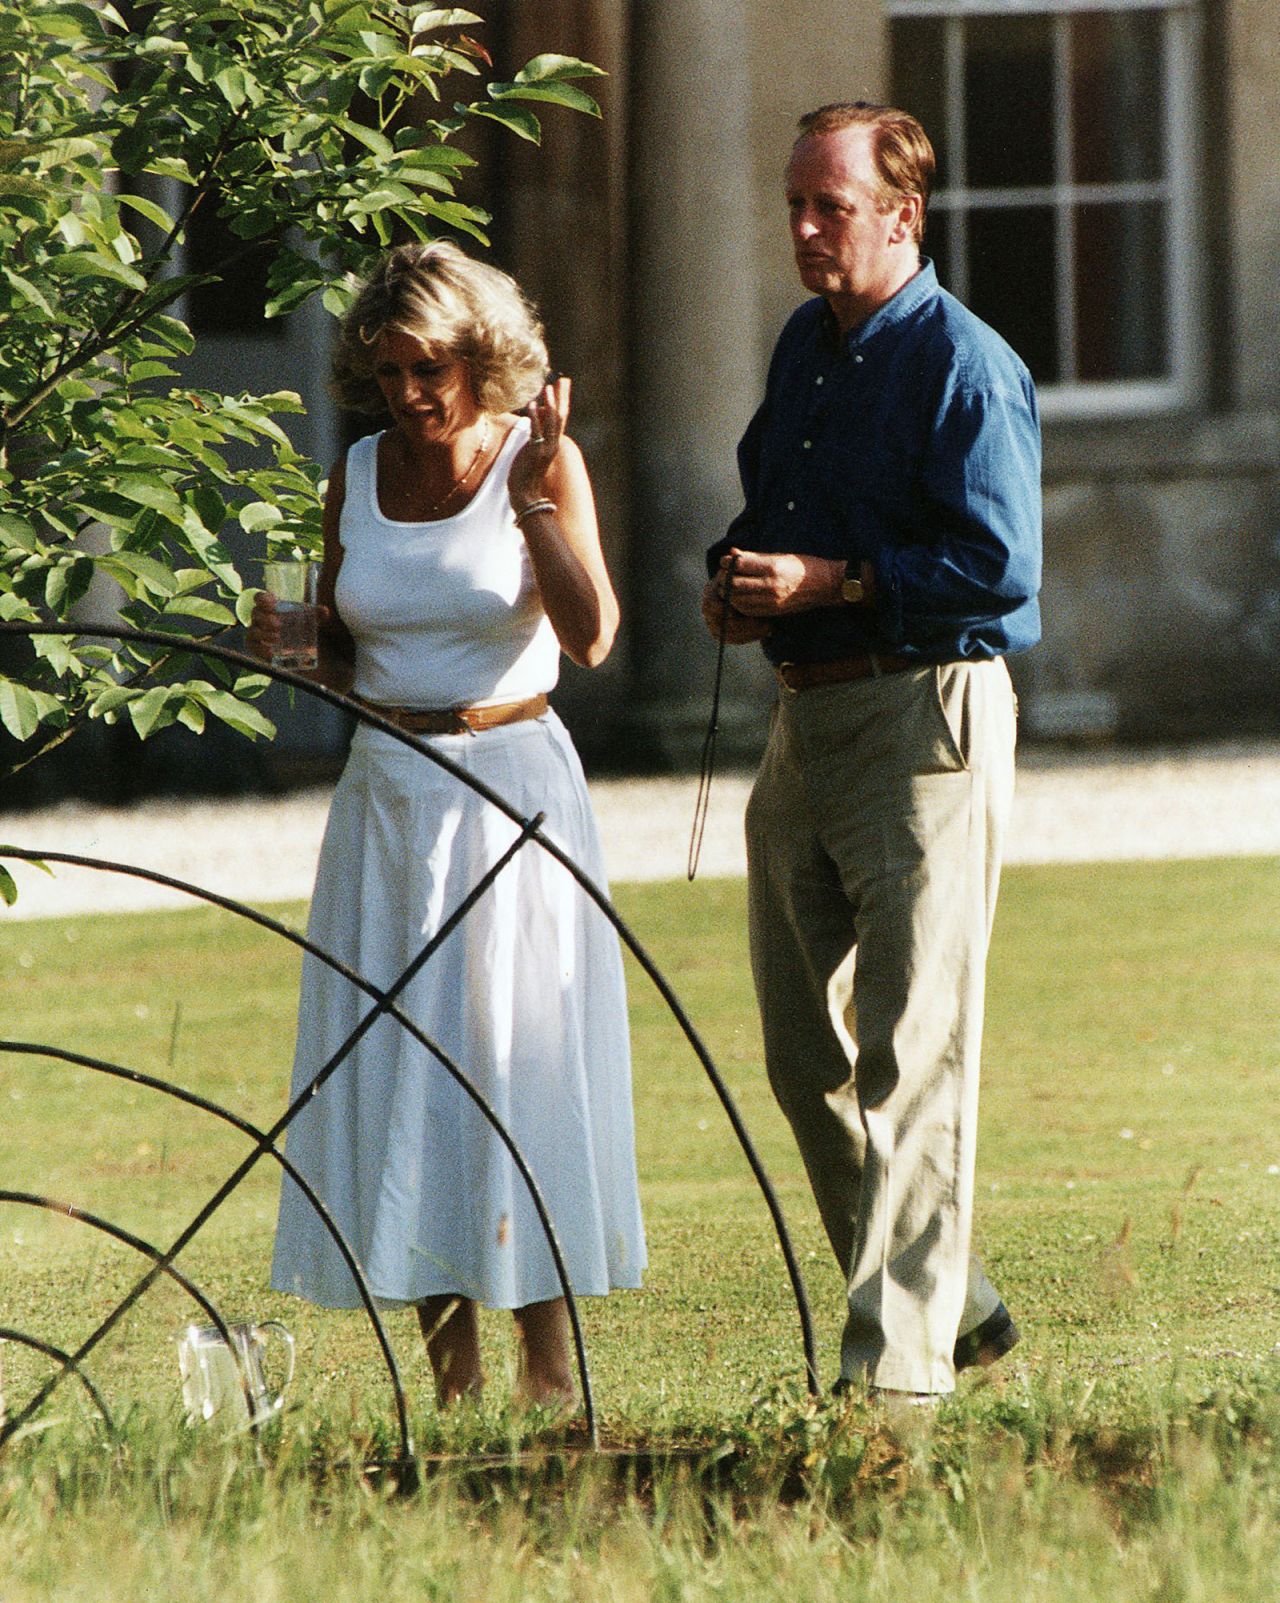 Similary, during the summer of 1993 Camilla's personal style was remarkably relatable. Like this white tank top and linen maxi skirt. Here, she's photographed outside with her first husband, Andrew.